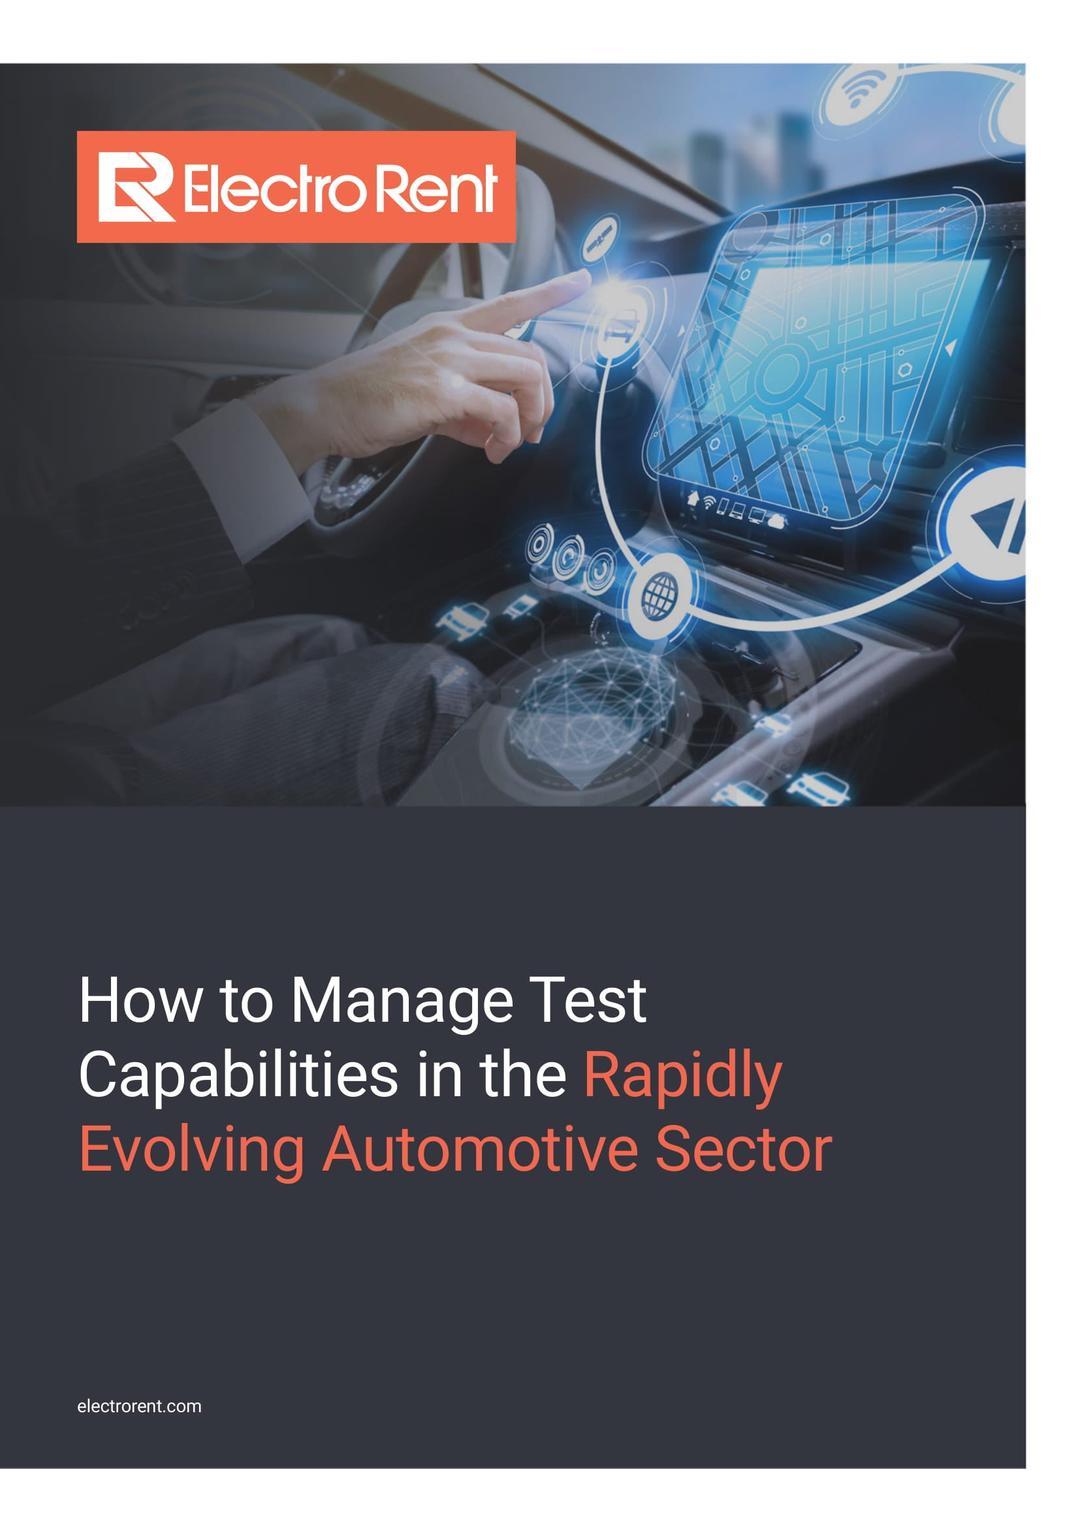 How to Manage Test Capabilities in the Automotive Industry, afbeelding